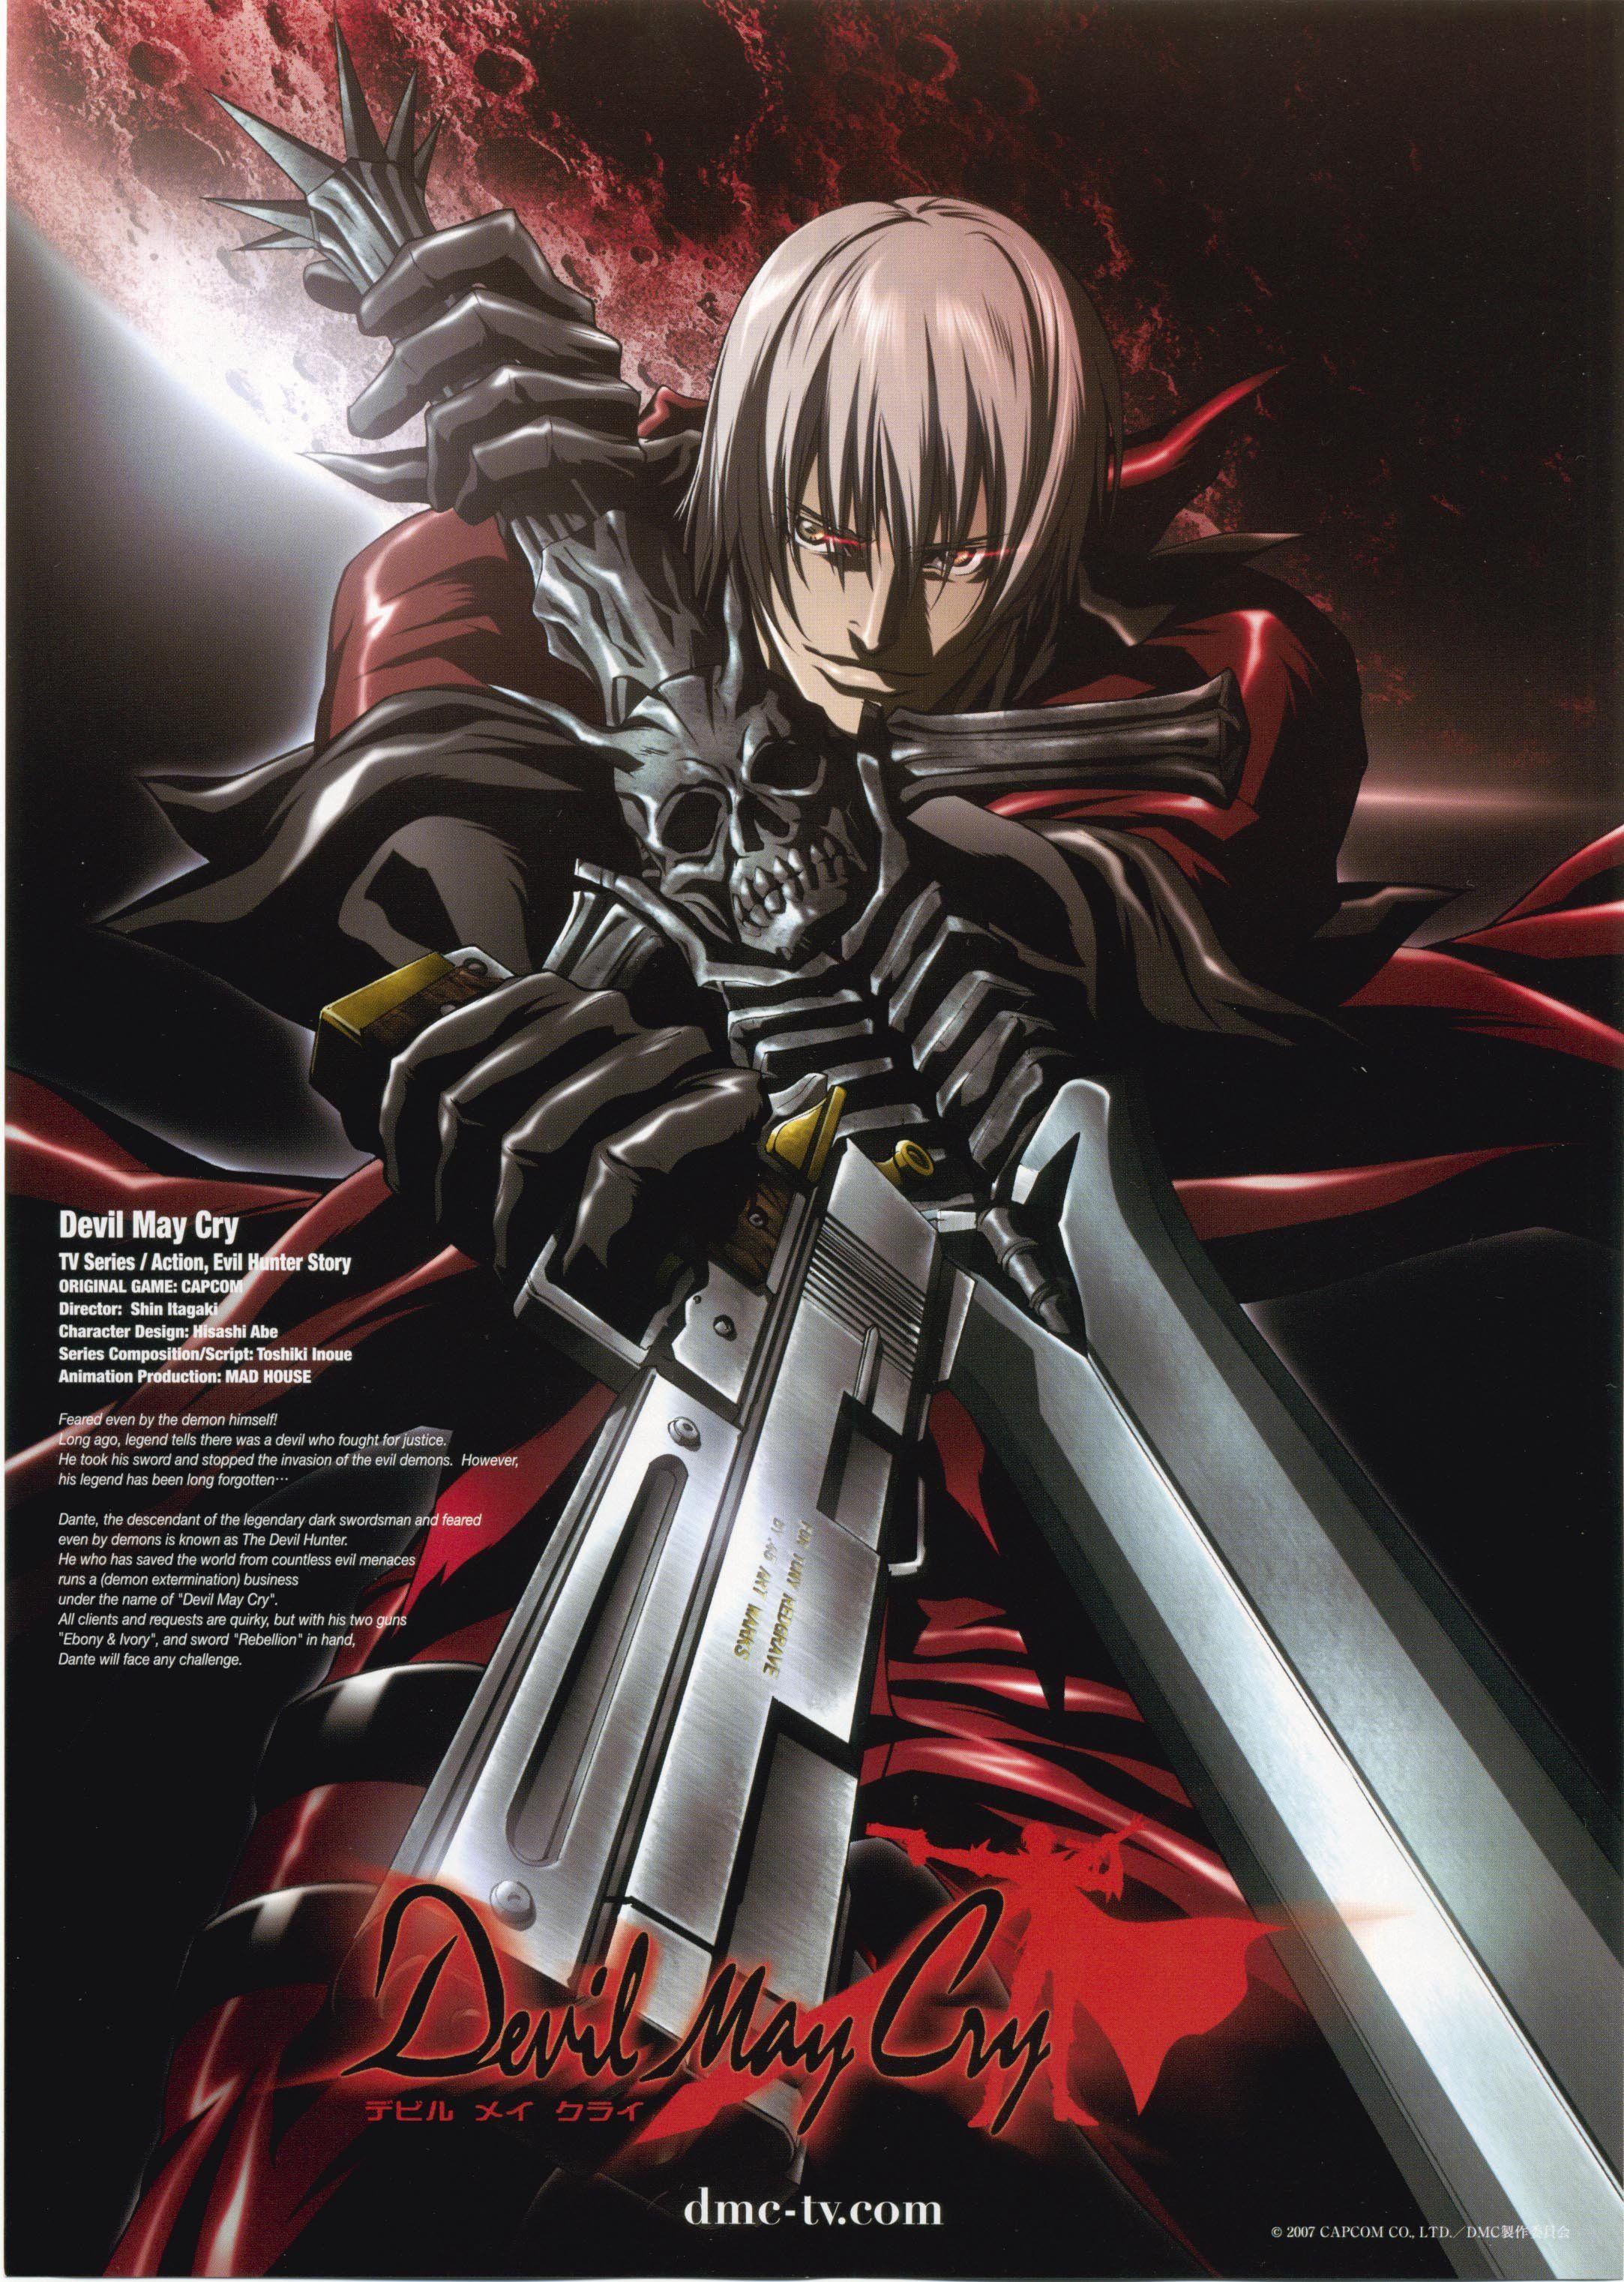 Devil May Cry Anime Wallpapers Top Free Devil May Cry Anime Backgrounds Wallpaperaccess